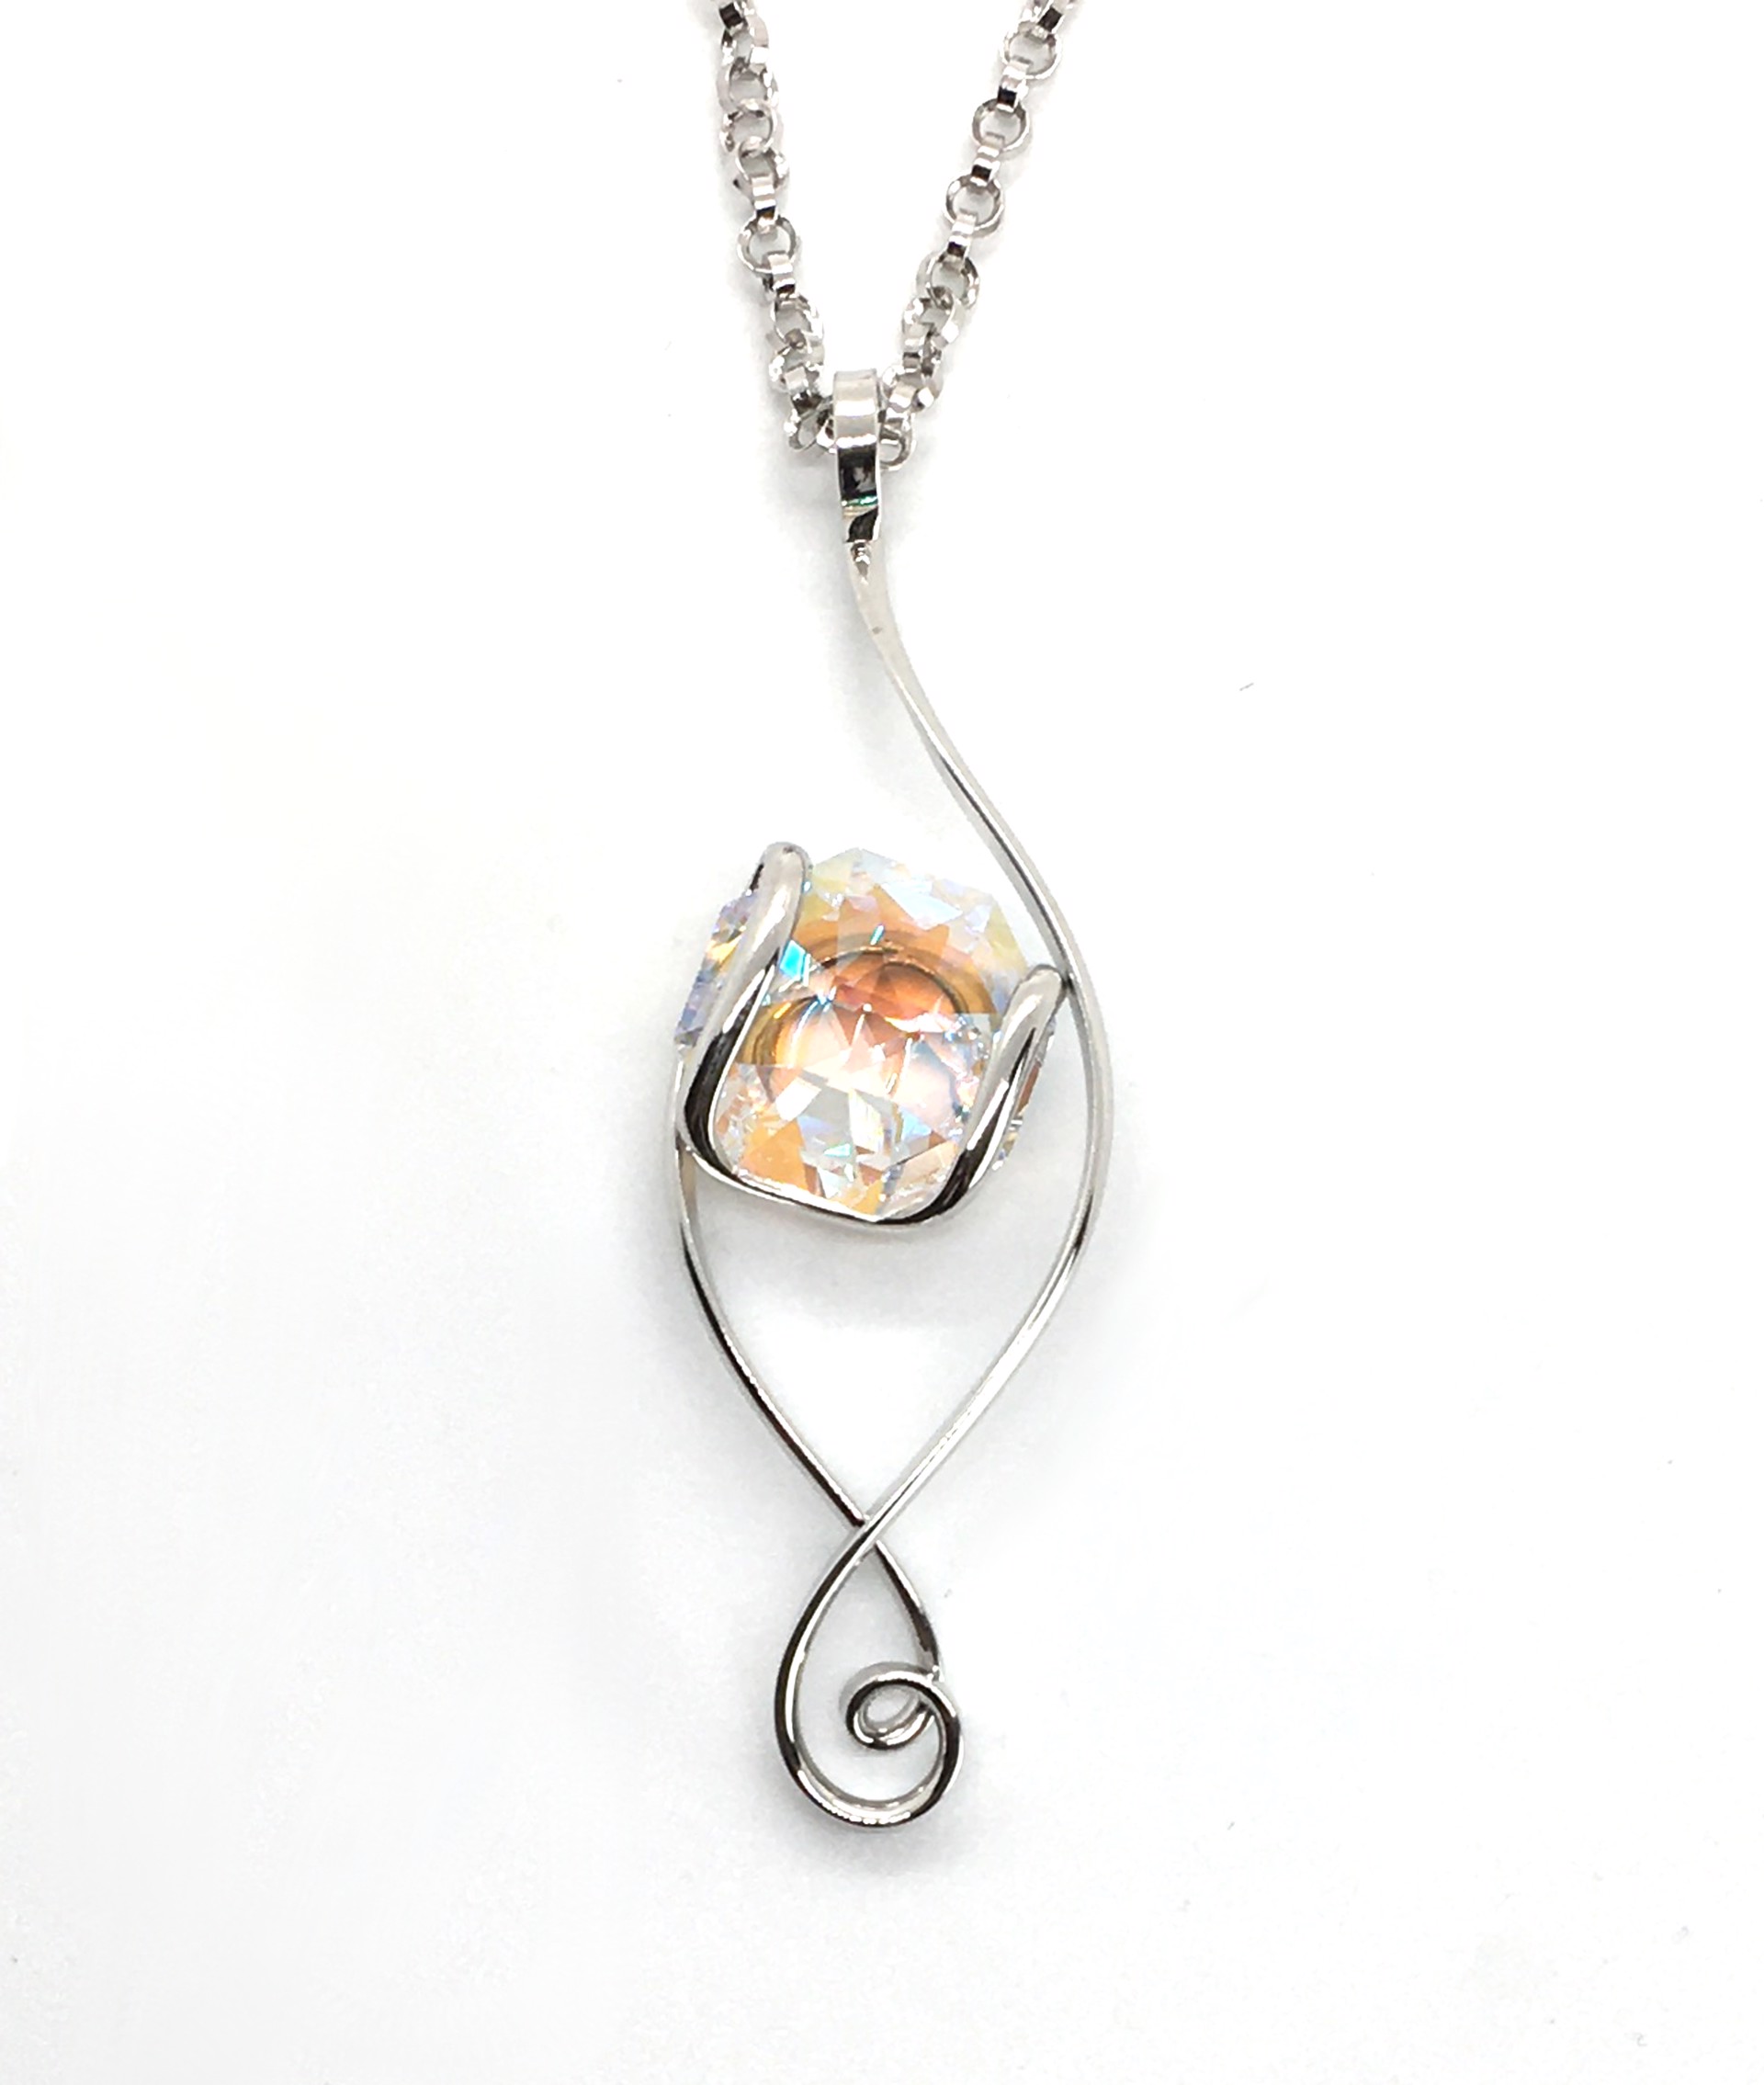 Pendant ~  Clear Austrian Swarovski Crystal ~ Mixed Metals Triple Coated with Rhodium ~ Handmade Setting ~ Chain Available Separately by Monique Touber